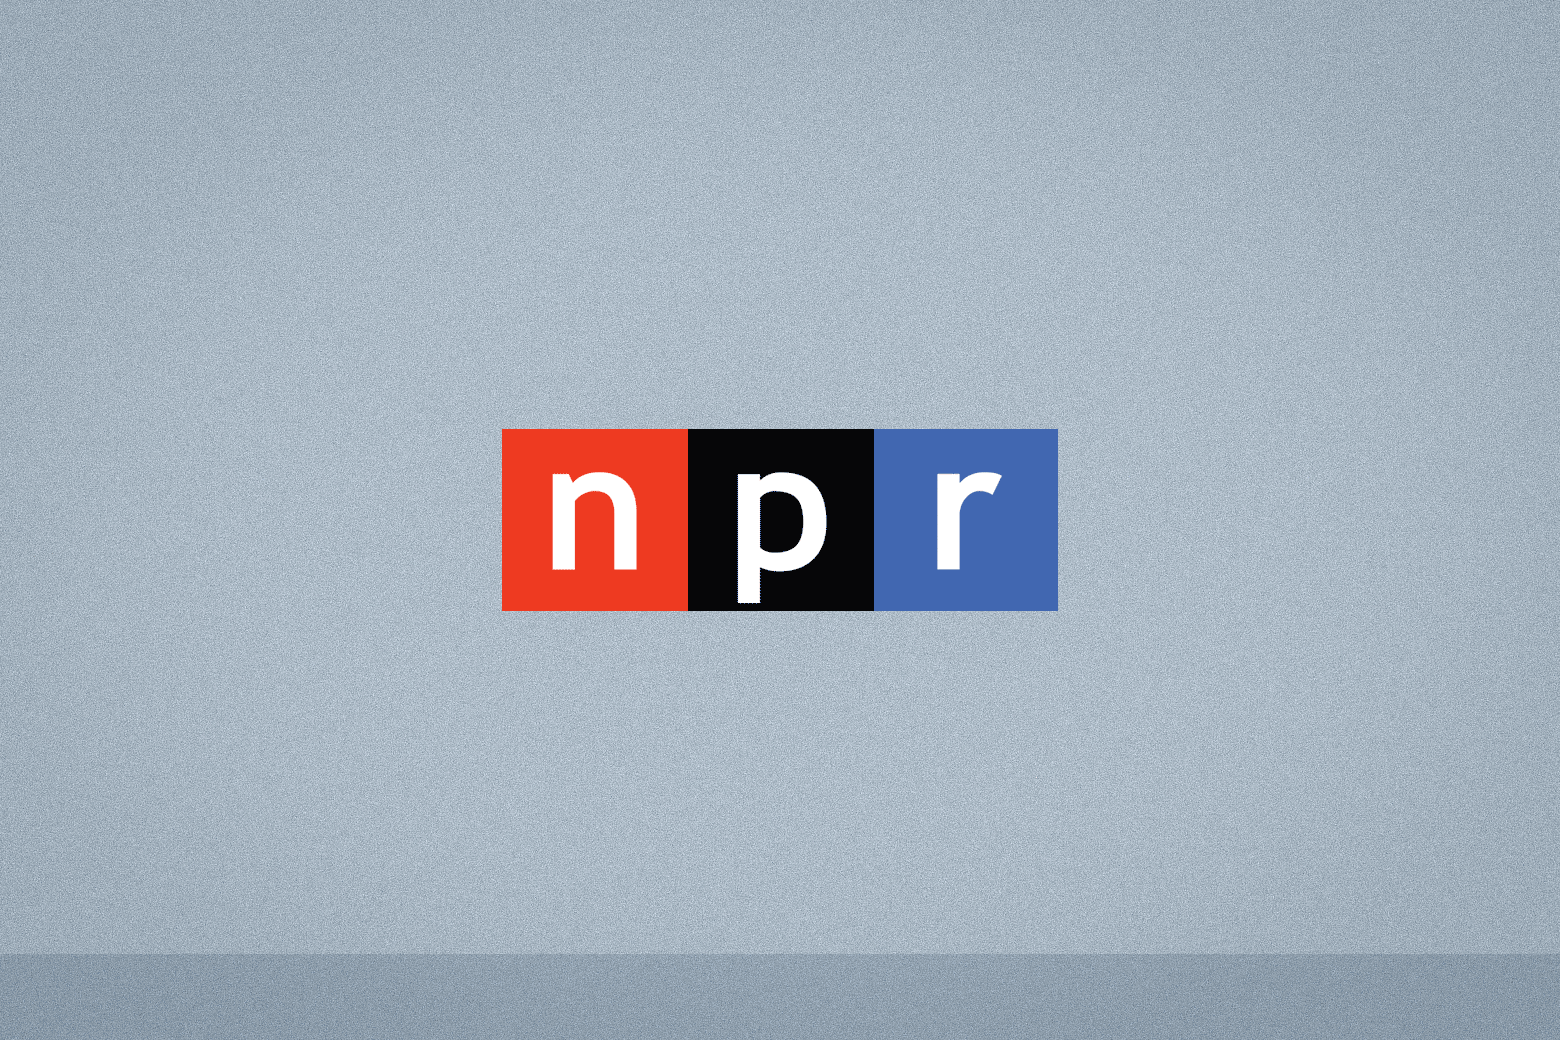 The NPR logo, with the R falling off.